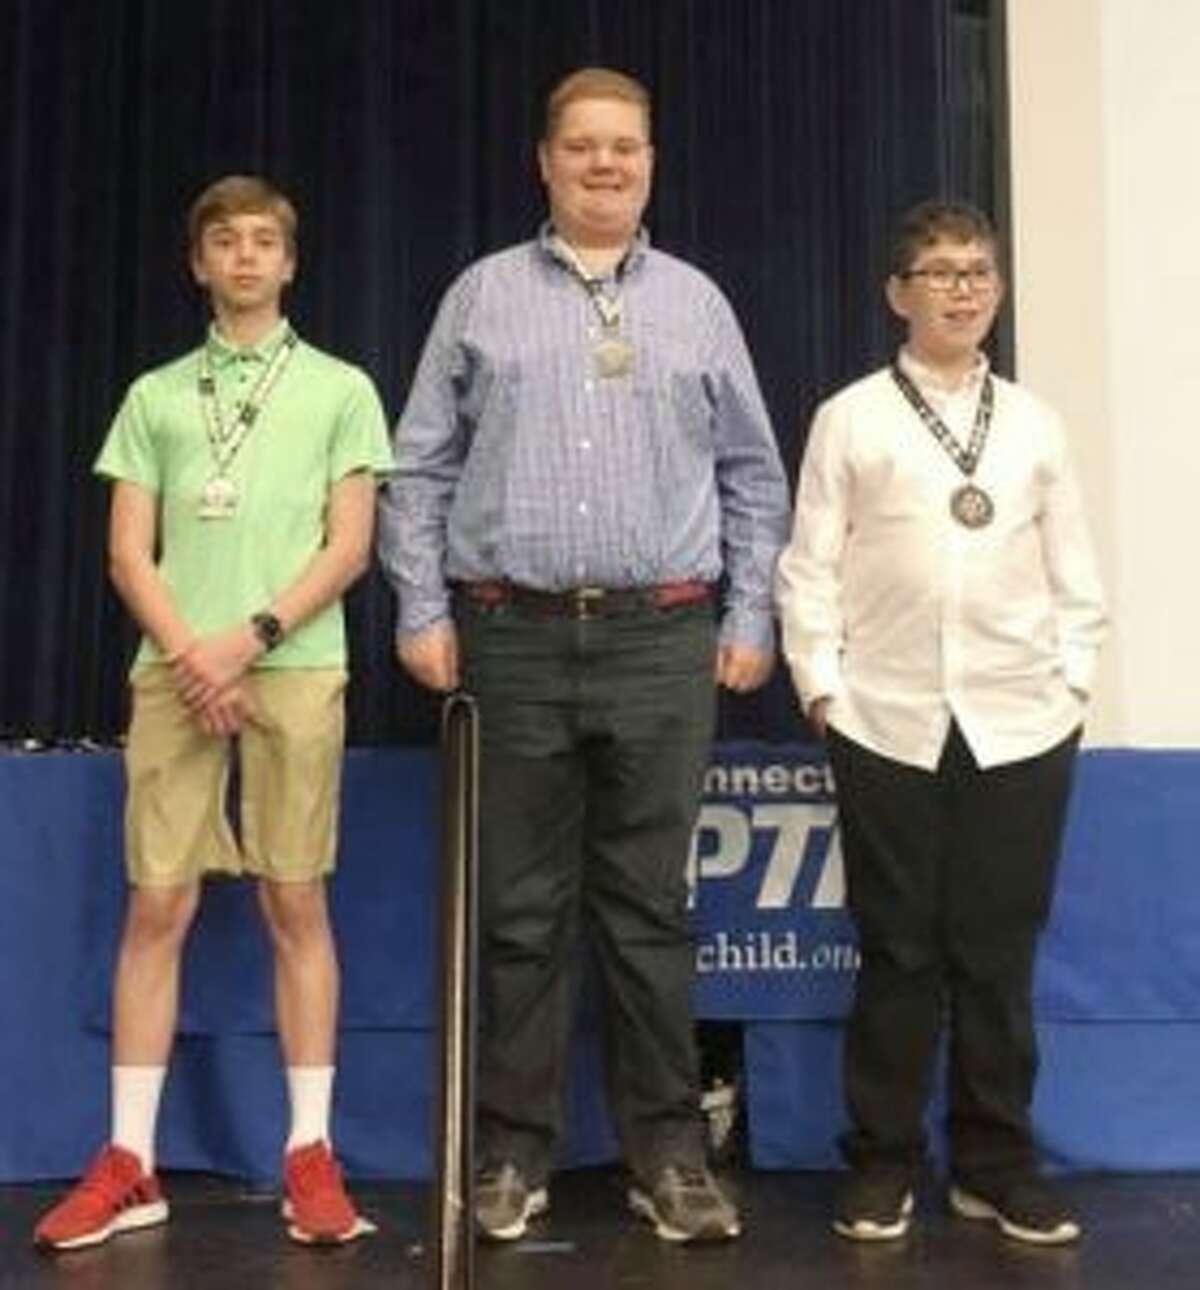 Madison Middle School student Johannes Rysse, first place Middle School: Photography; Hillcrest Middle School’s Alex Chamberlin, first place Special Artist: Musical Composition; and Madison Middle School’s Seth Goldstein, third place Middle School: Film Production.